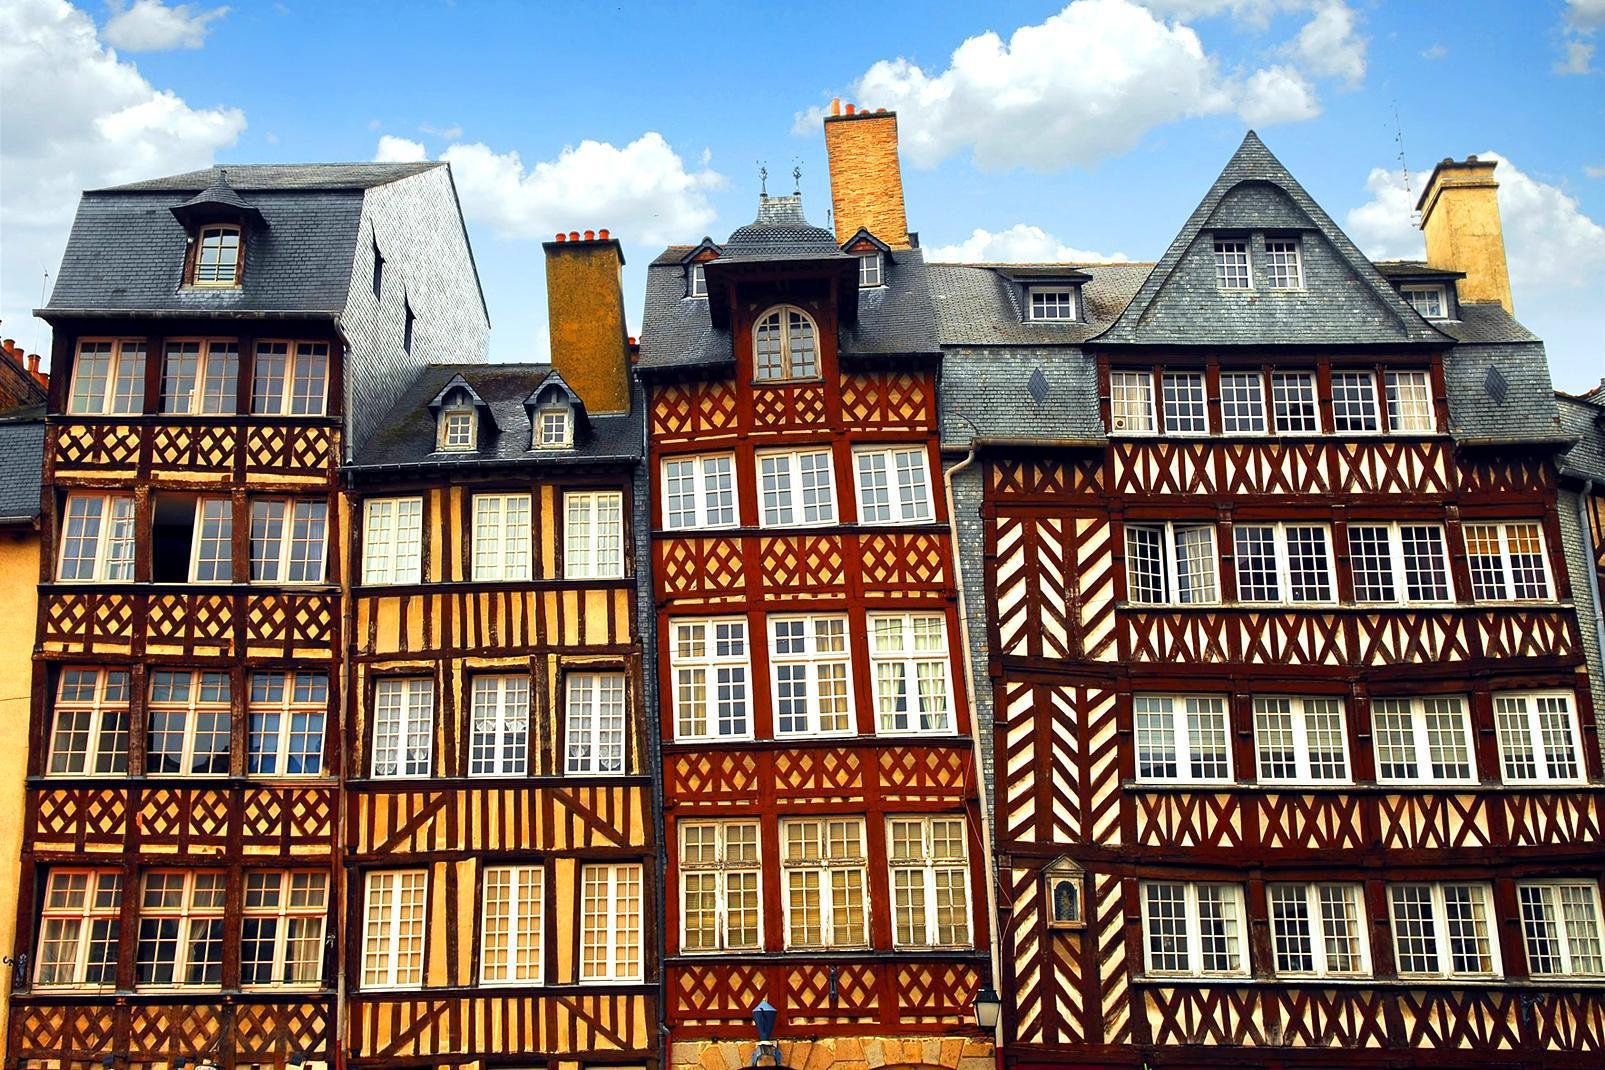 This Breton city, established in the 1st century BC, is located at the confluence of the Ille and Vilaine rivers. Lively, with a heavy student presence, Rennes is a pleasant city to visit. 
It boasts a Medieval air with its half-timbered houses, Mordelaises gates, and a drawbridge around what is left of the old fortifications, as well as the Duchesne Tower and its 15th century rampart. In 1720, a fire ...